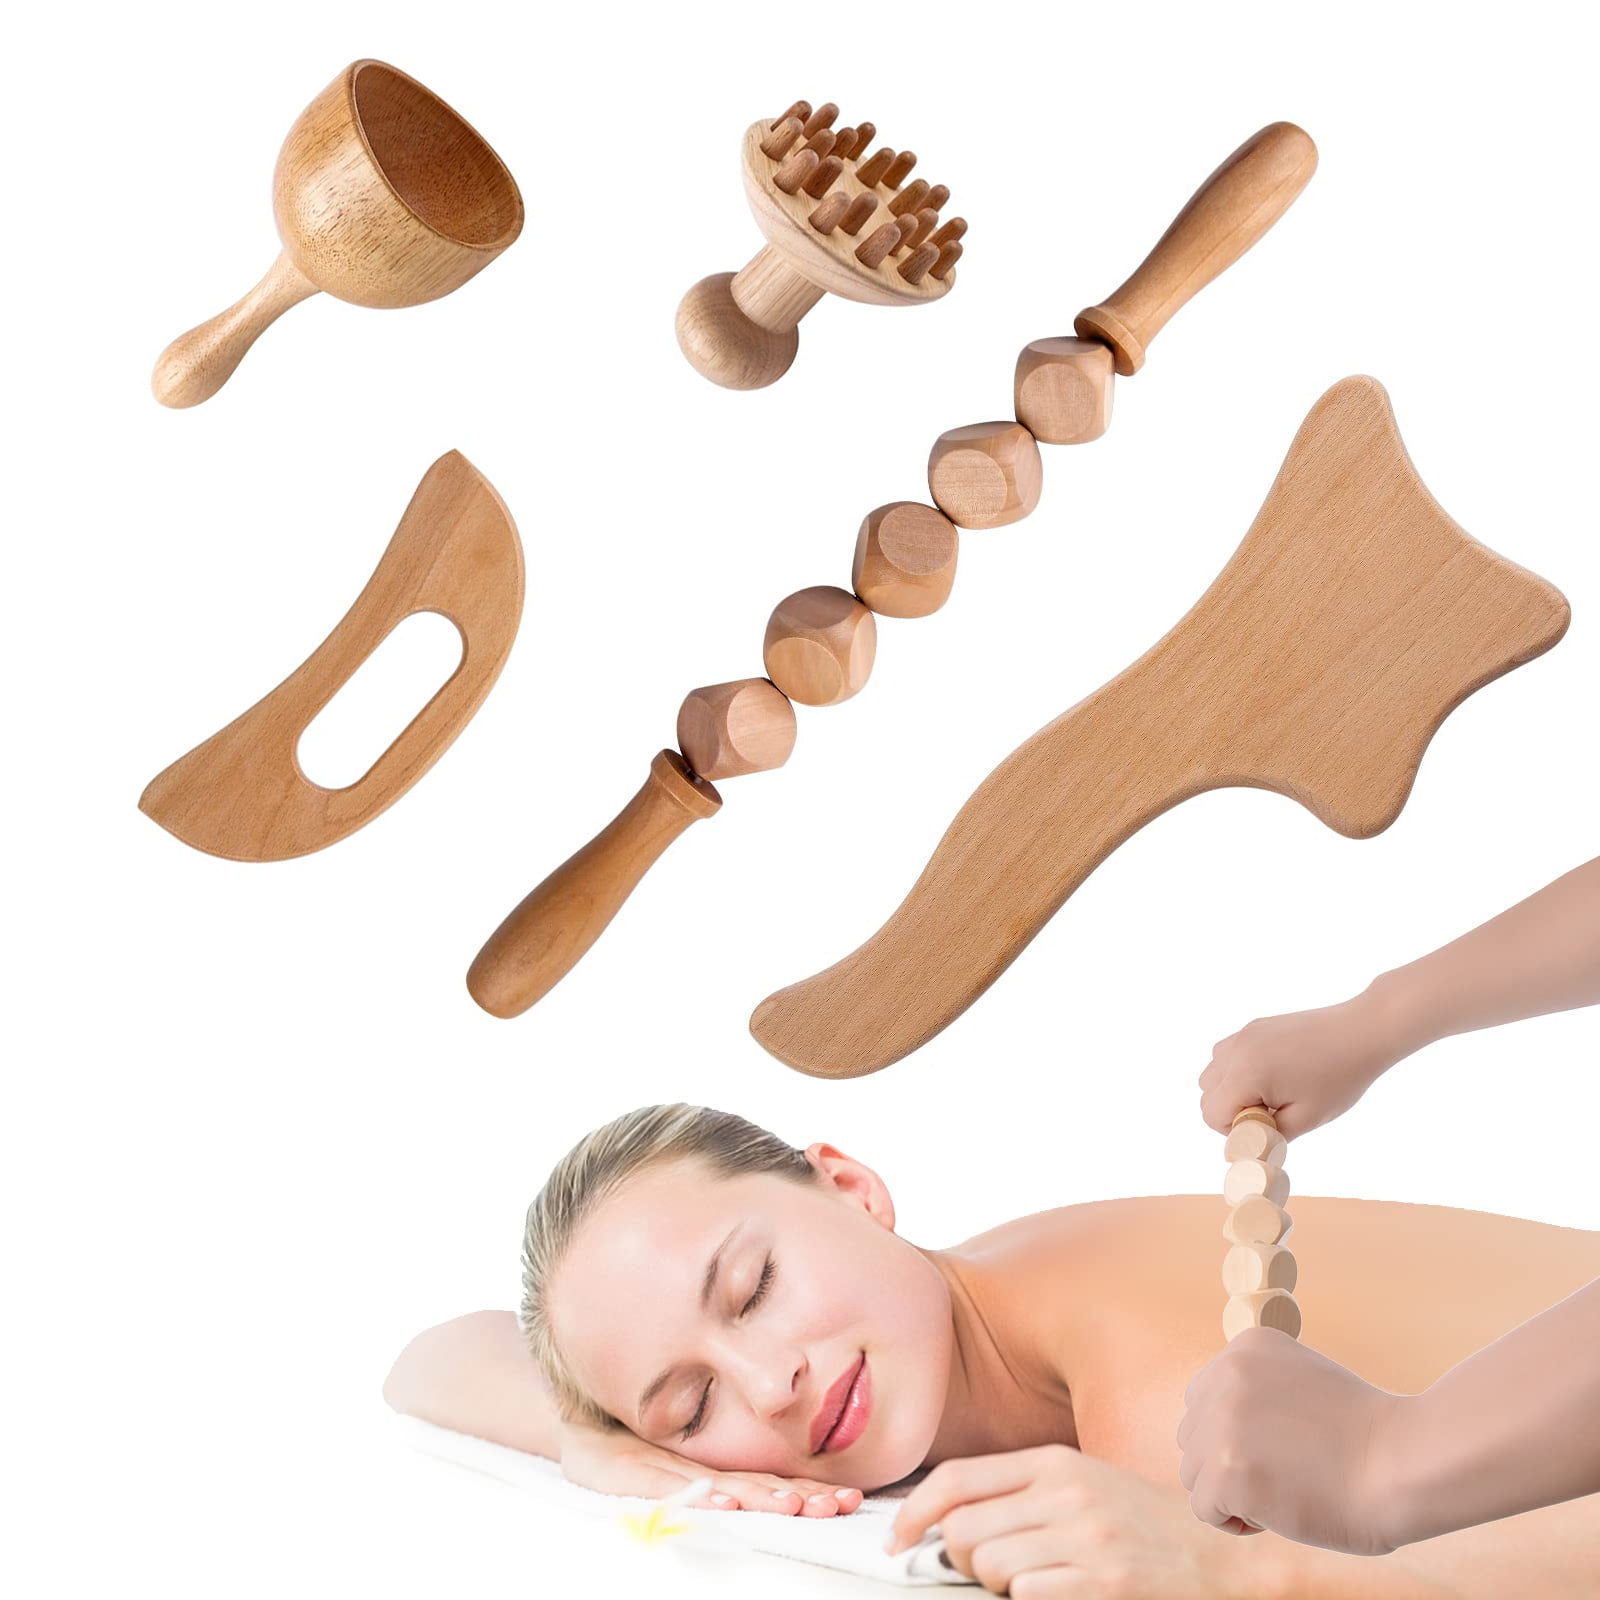 Coloody 5 in 1 Maderoterapia Kit, Wood Therapy Massage Tools Lymphatic  Drainage Massager Anti Cellulite Wood Massage Set Wooden Roller Lymphatic  Drainage Tool 